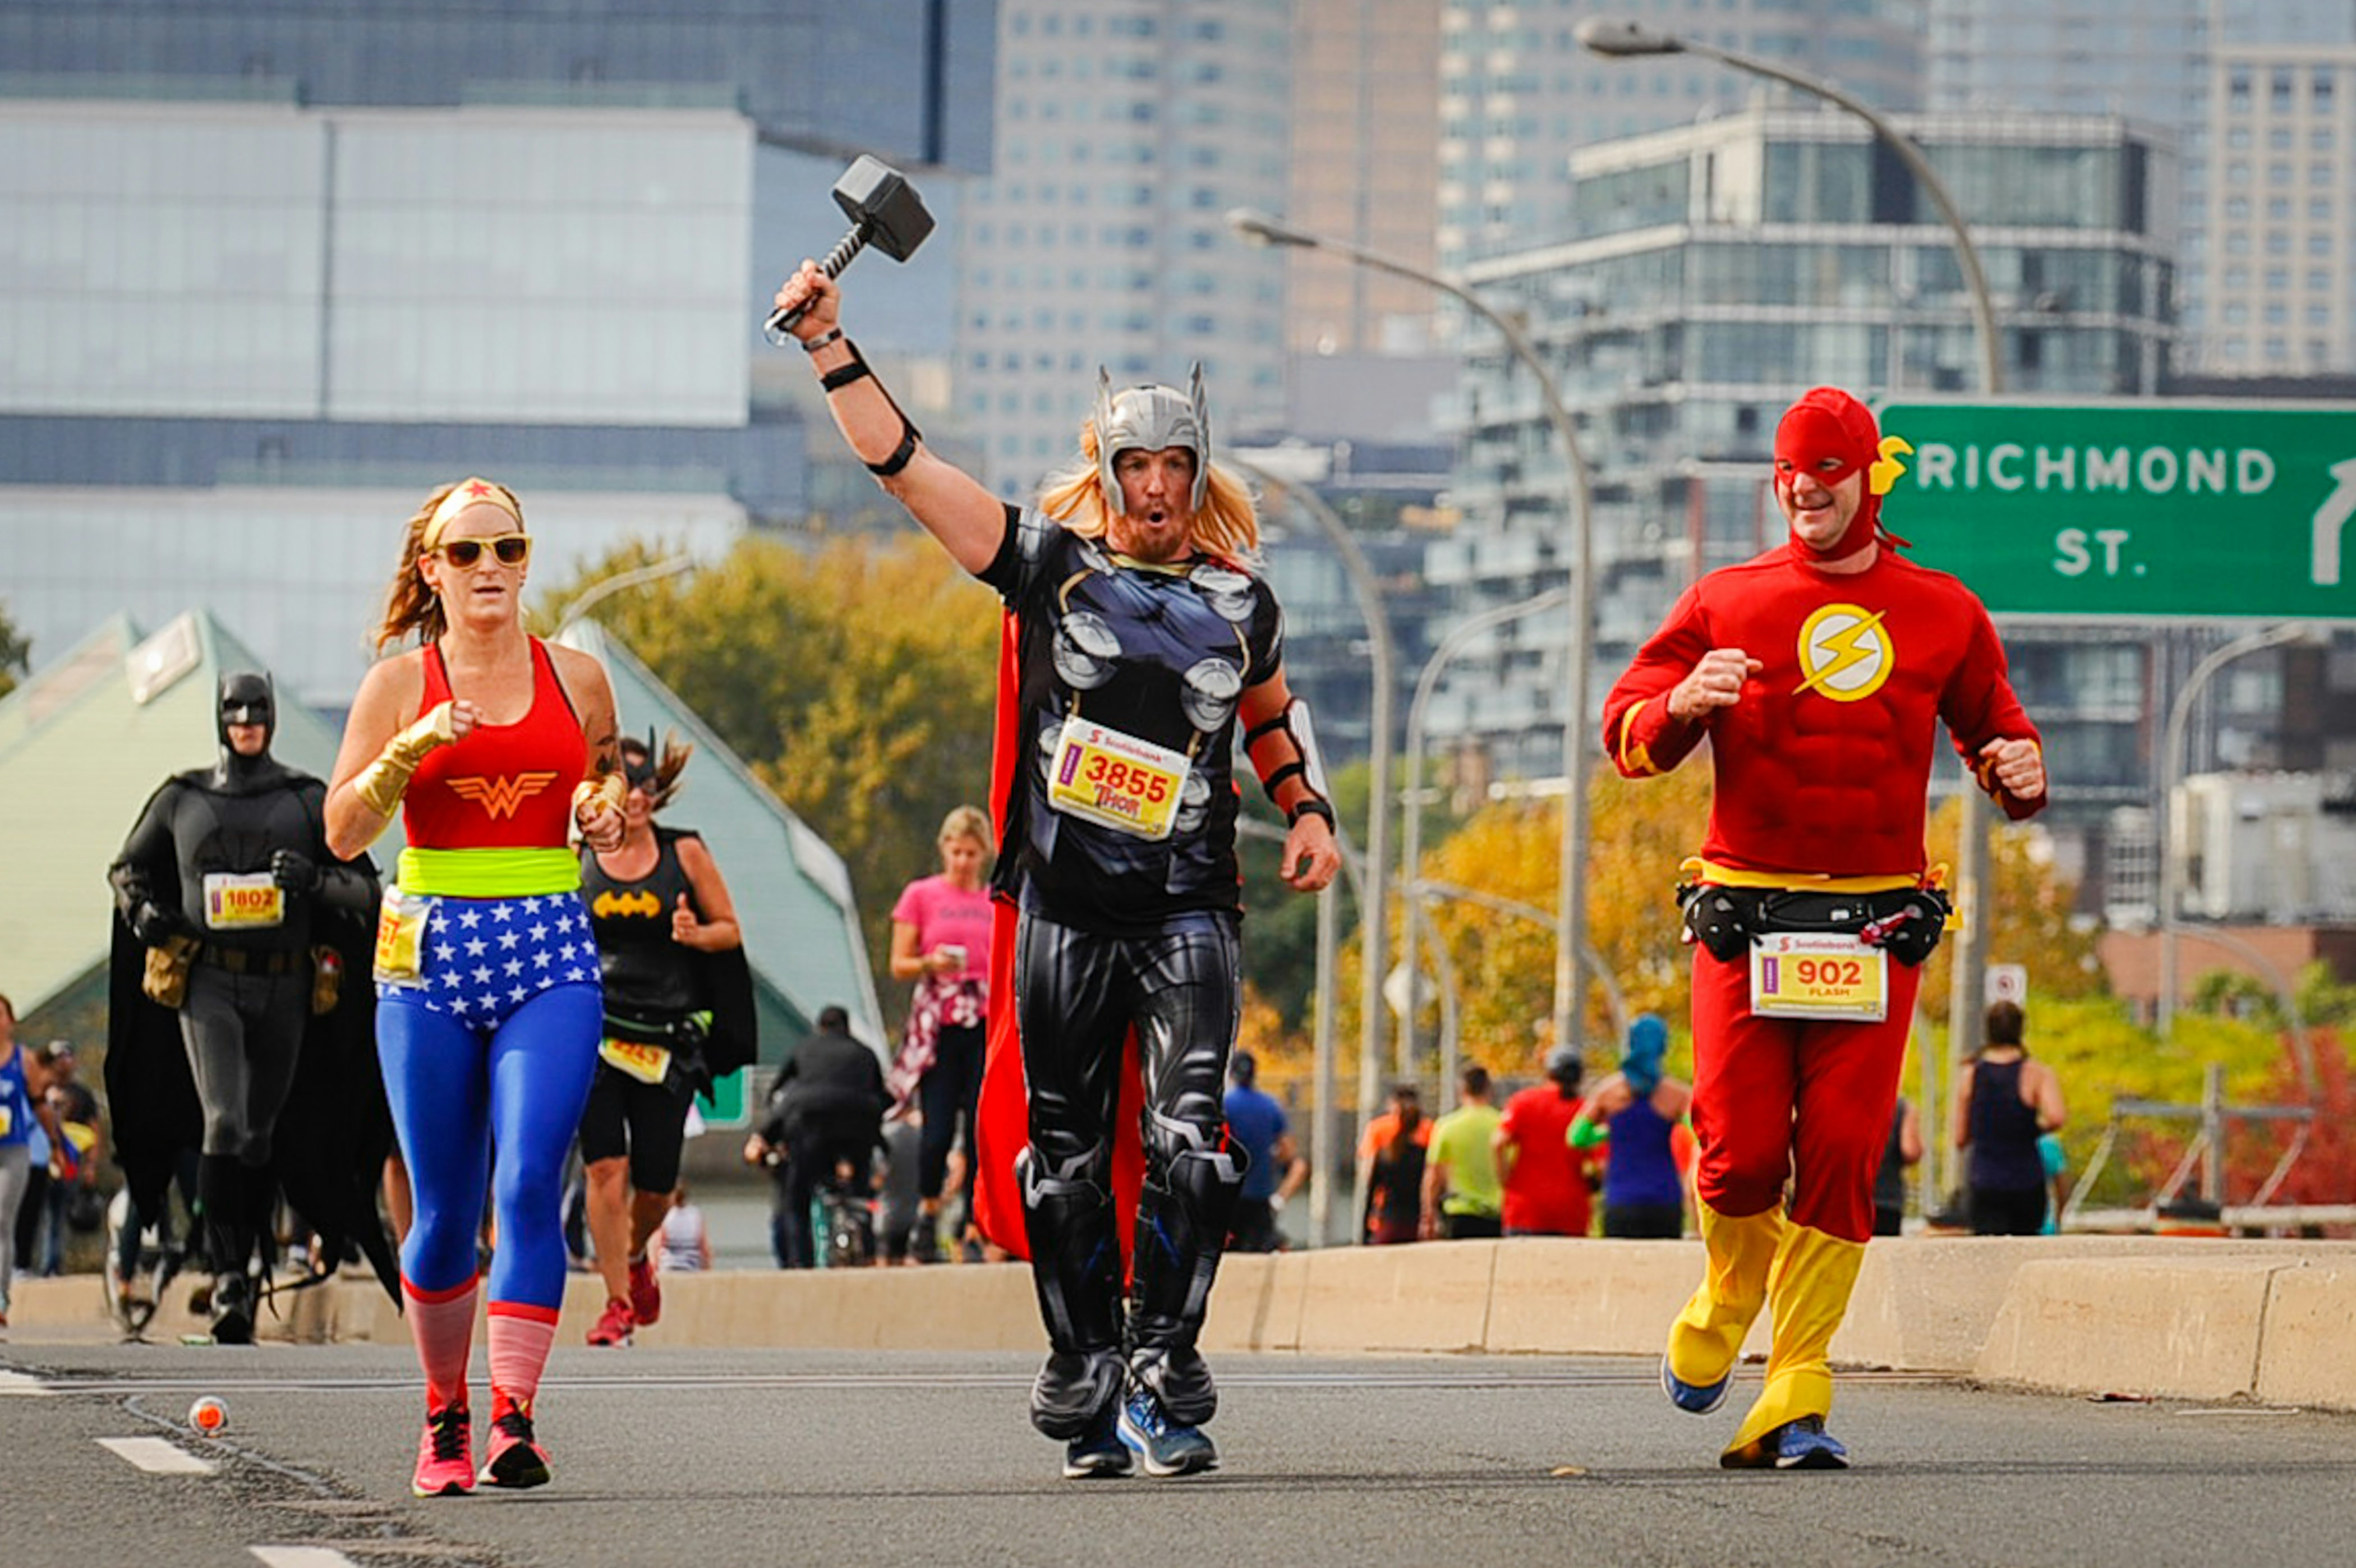 A trio of runners, one dressed as Wonder Woman, another dressed as Thor and the other dressed as the Flash run during the Toronto Waterfront Marathon